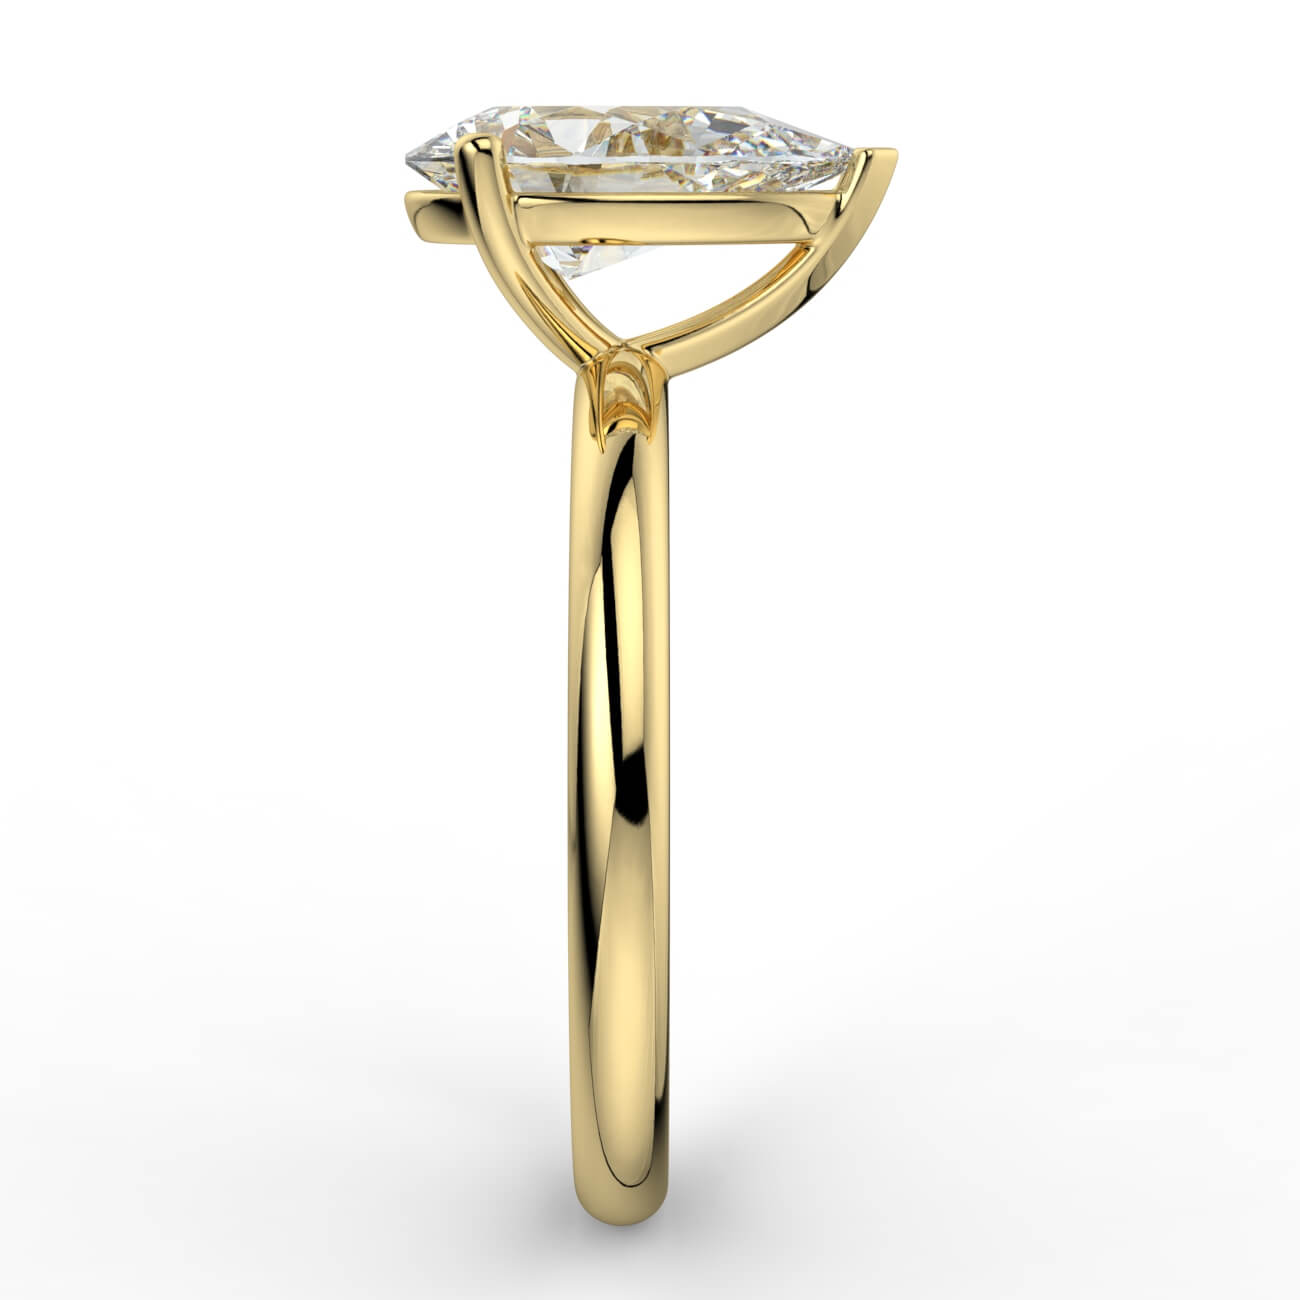 Solitaire pear shape diamond engagement ring in yellow gold – Australian Diamond Network